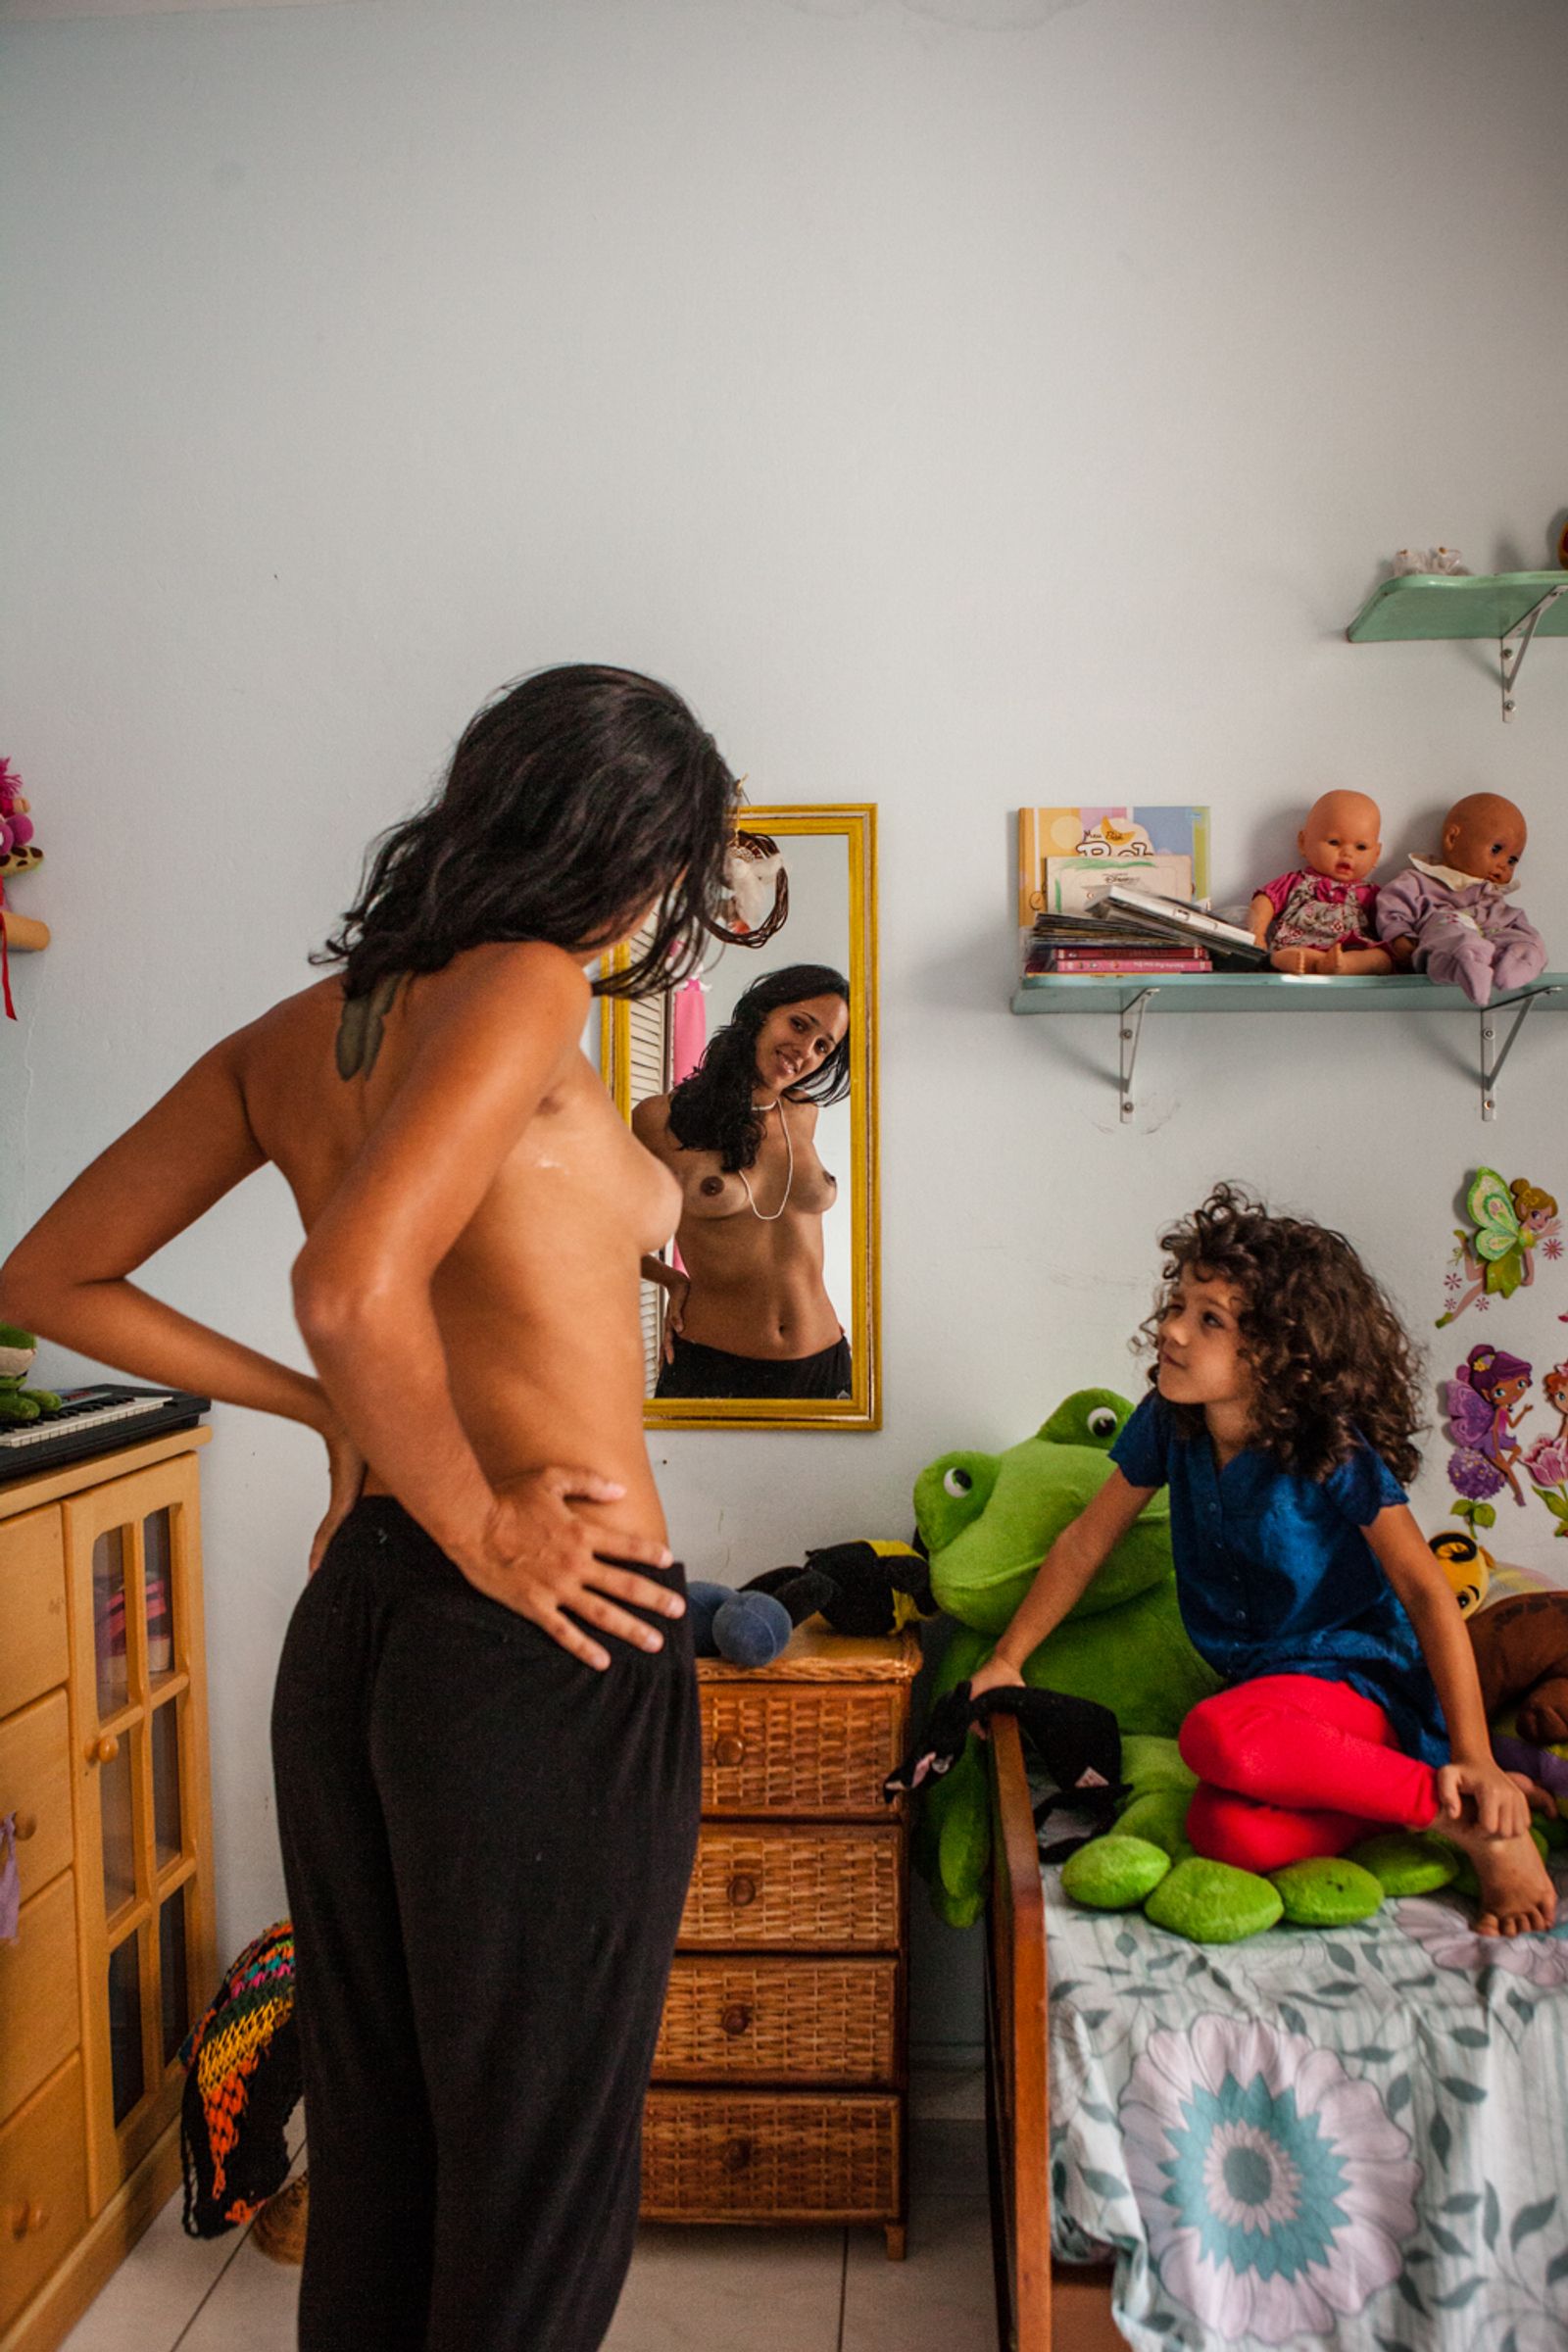 © Leticia Valverdes - Image from the BIRTH MARKS- OBSTETRIC VIOLENCE IN BRAZIL, A CONTEMPORARY HUMAN RIGHTS ISSUE photography project